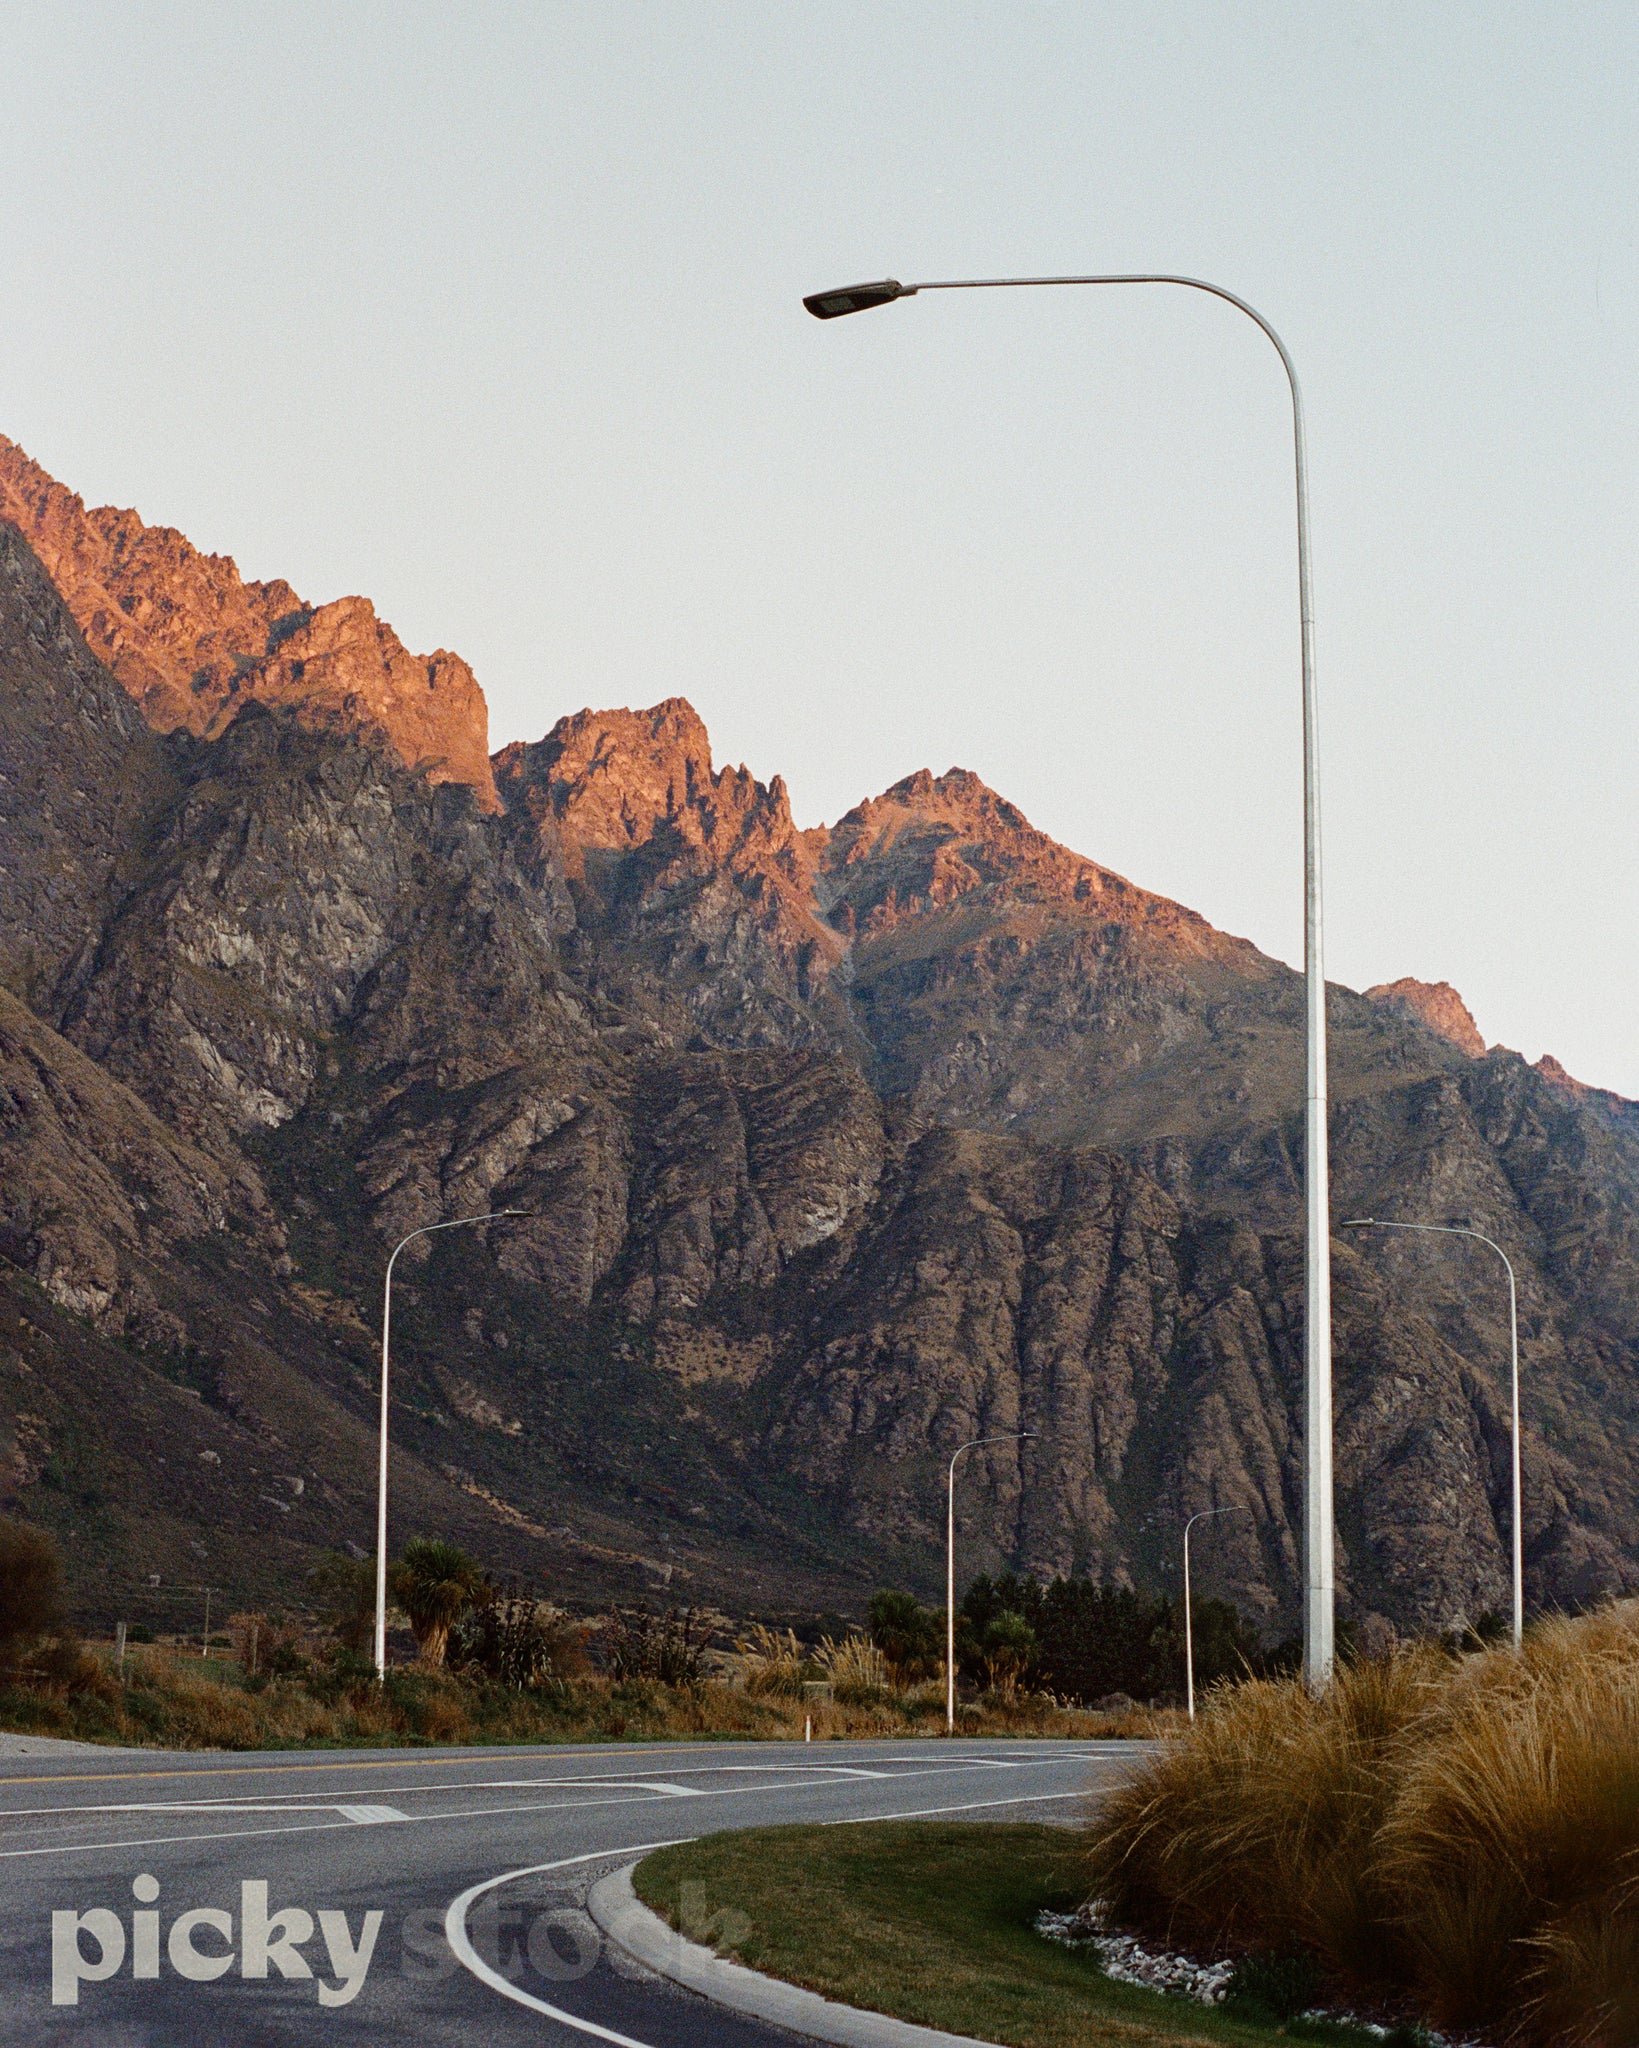 A portrait image of the Remarkables mountain range, with a road in the foreground. Large street lights hero the image, and are seen down the road. The road has a white line in the middle with flush strip. Mountain is lit with a soft golden light, early evening. Pastel sky. 